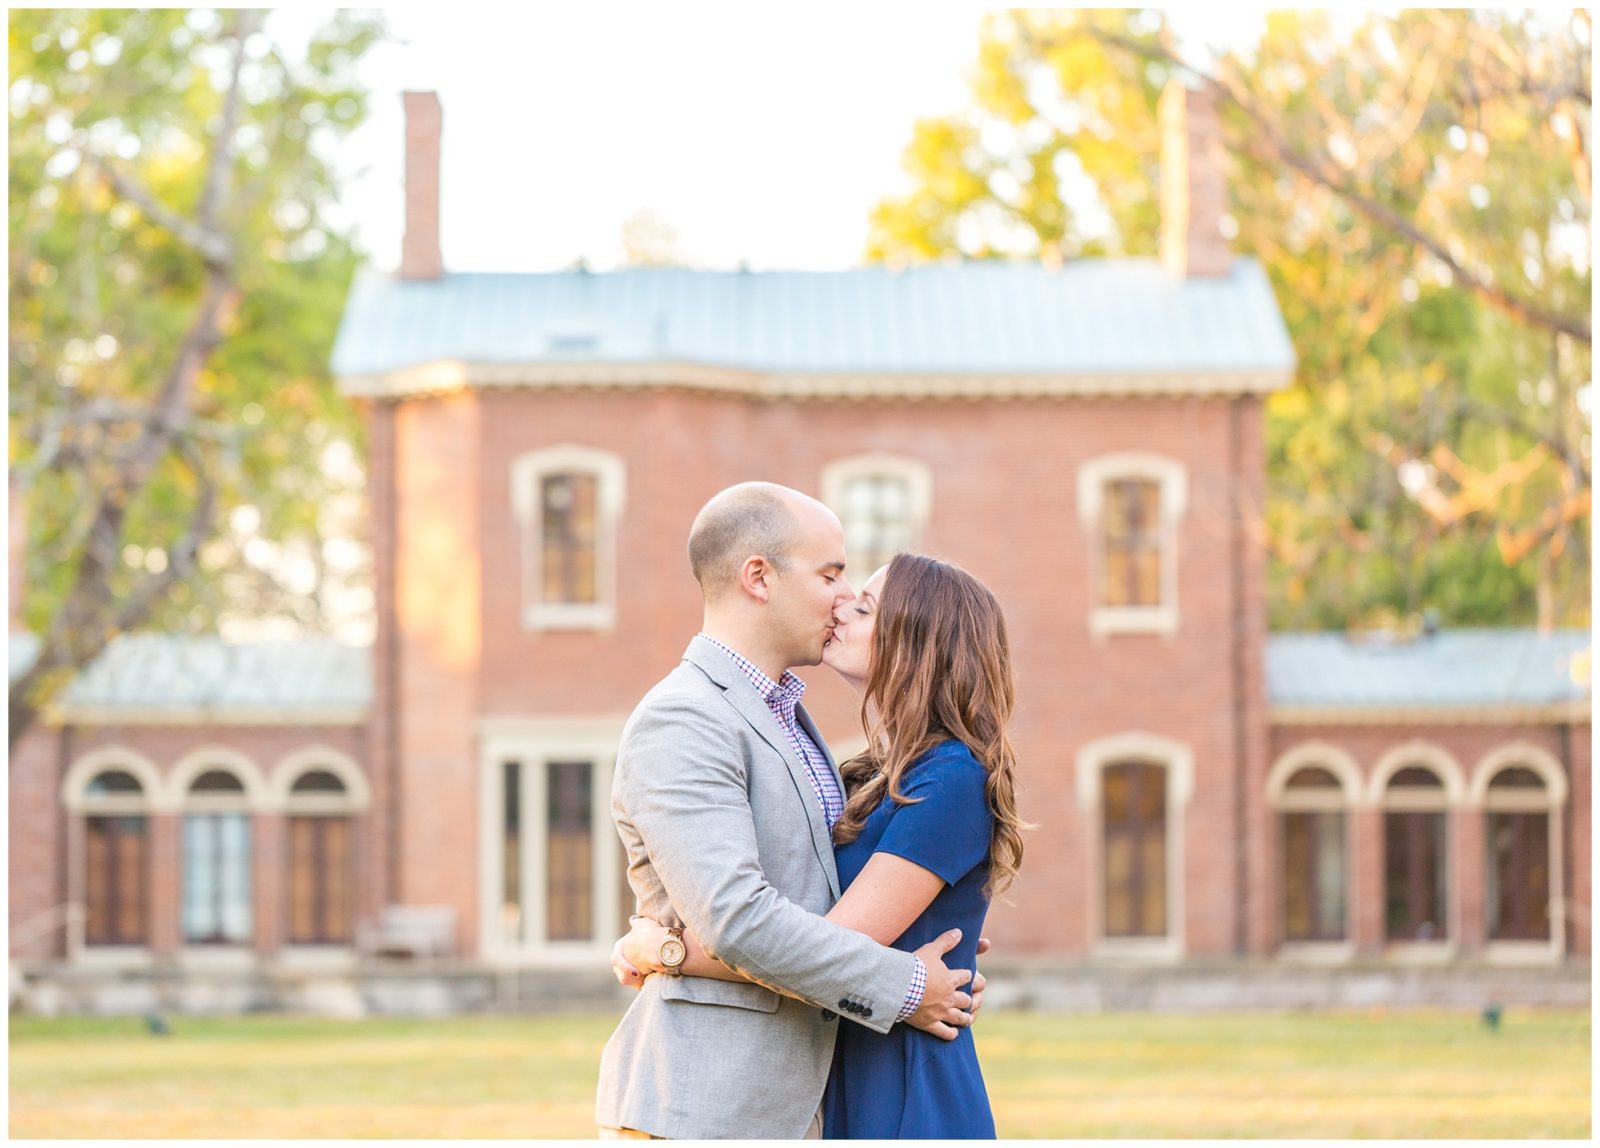 Fall engagement session at the beautiful Ashland, The Henry Clay Estate in Lexington, Kentucky. Featuring vibrant fall colors and their sweet dog Pepper. Photo by: Kevin and Anna Photography www.kevinandannaweddings.com